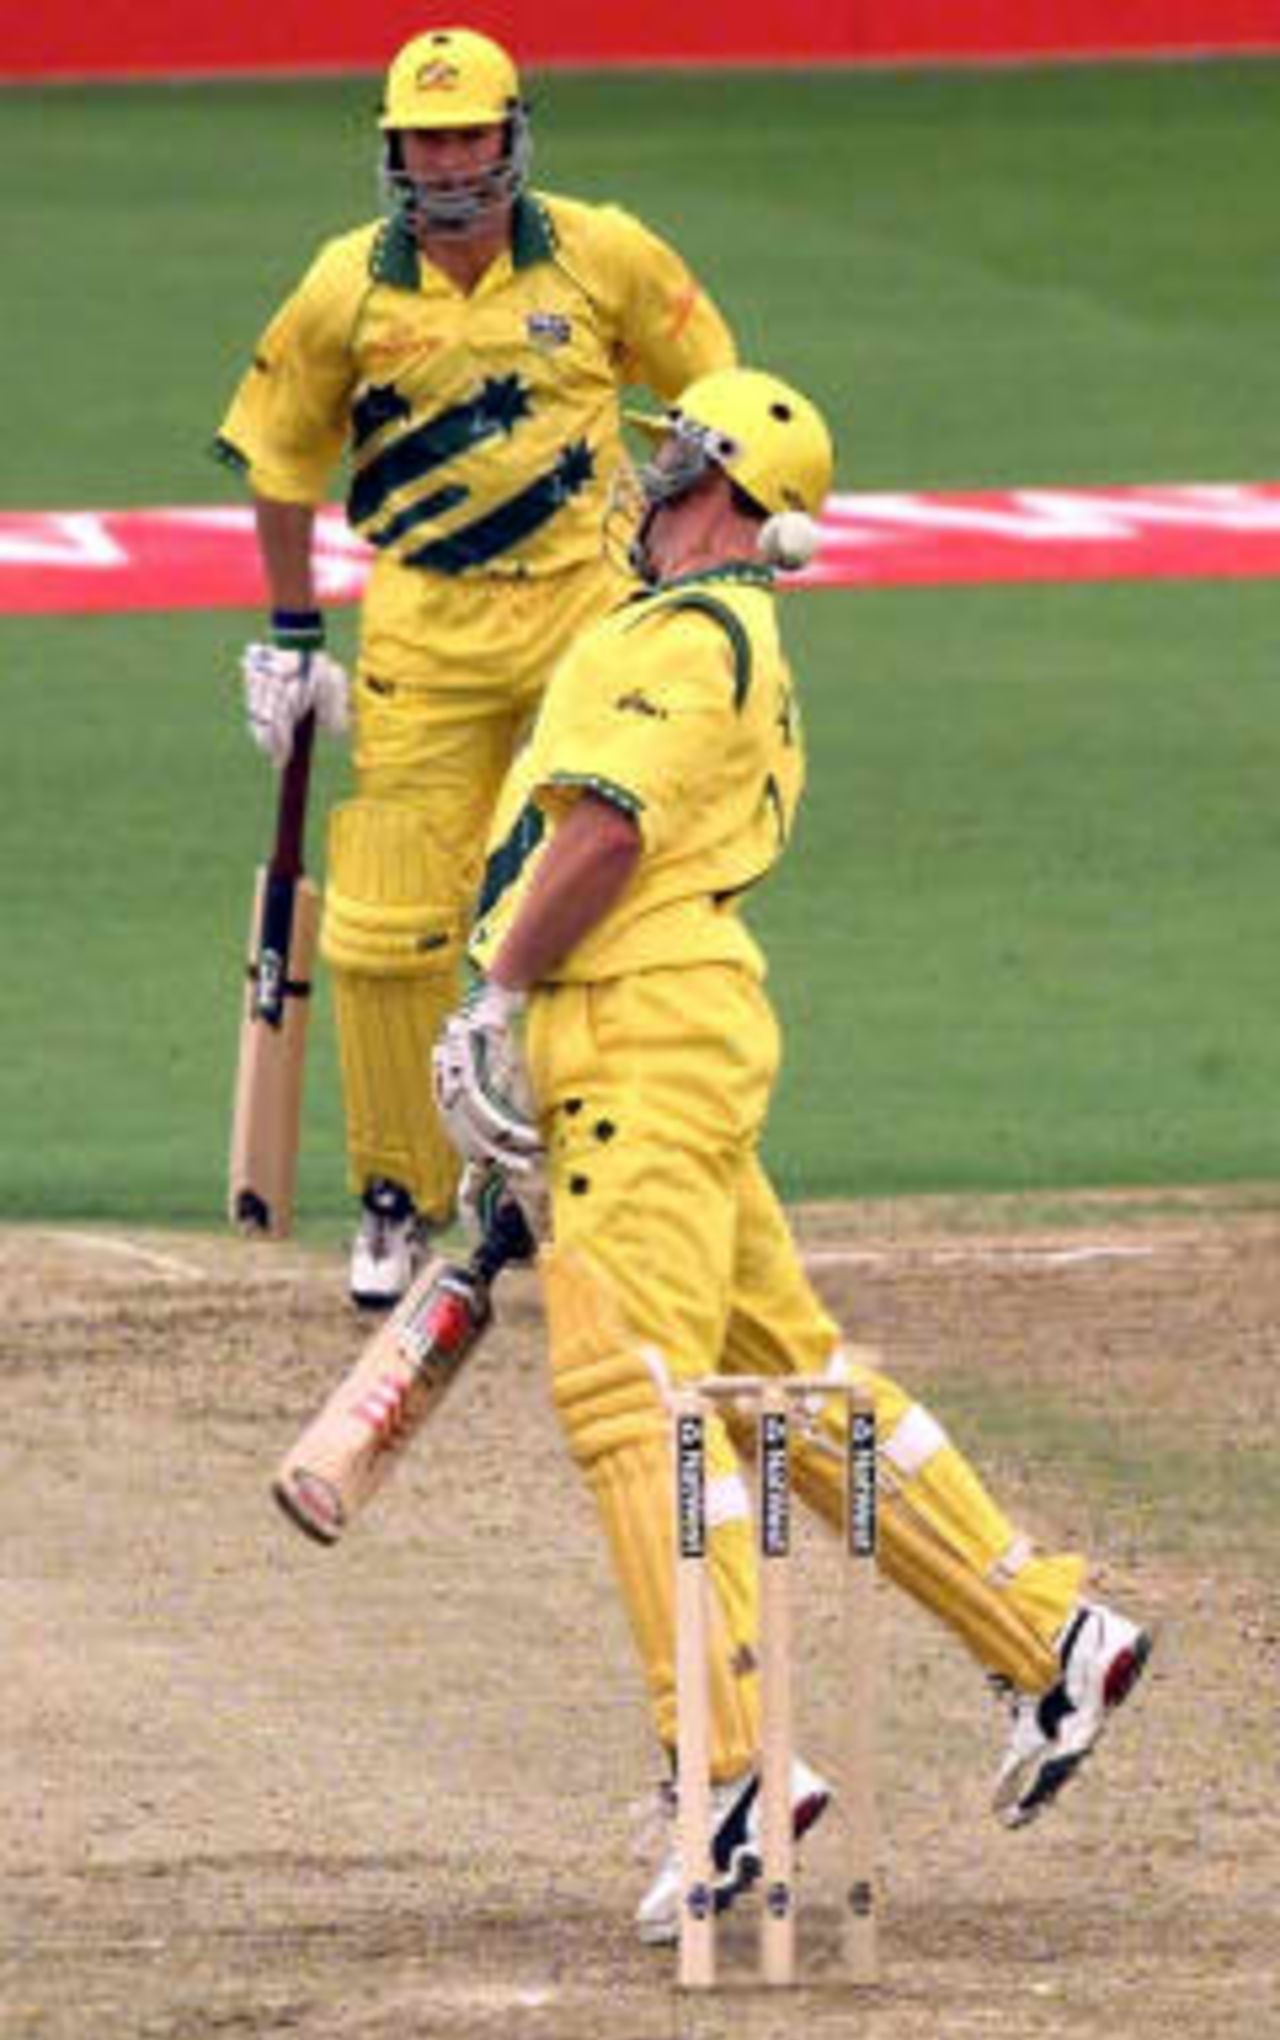 Rough treatment for Michael Bevan (front) of Australia as Captain Steve Waugh looks on as a high ball from Donald just misses Bevan in their Cricket World Cup semi-final 17 June 1999